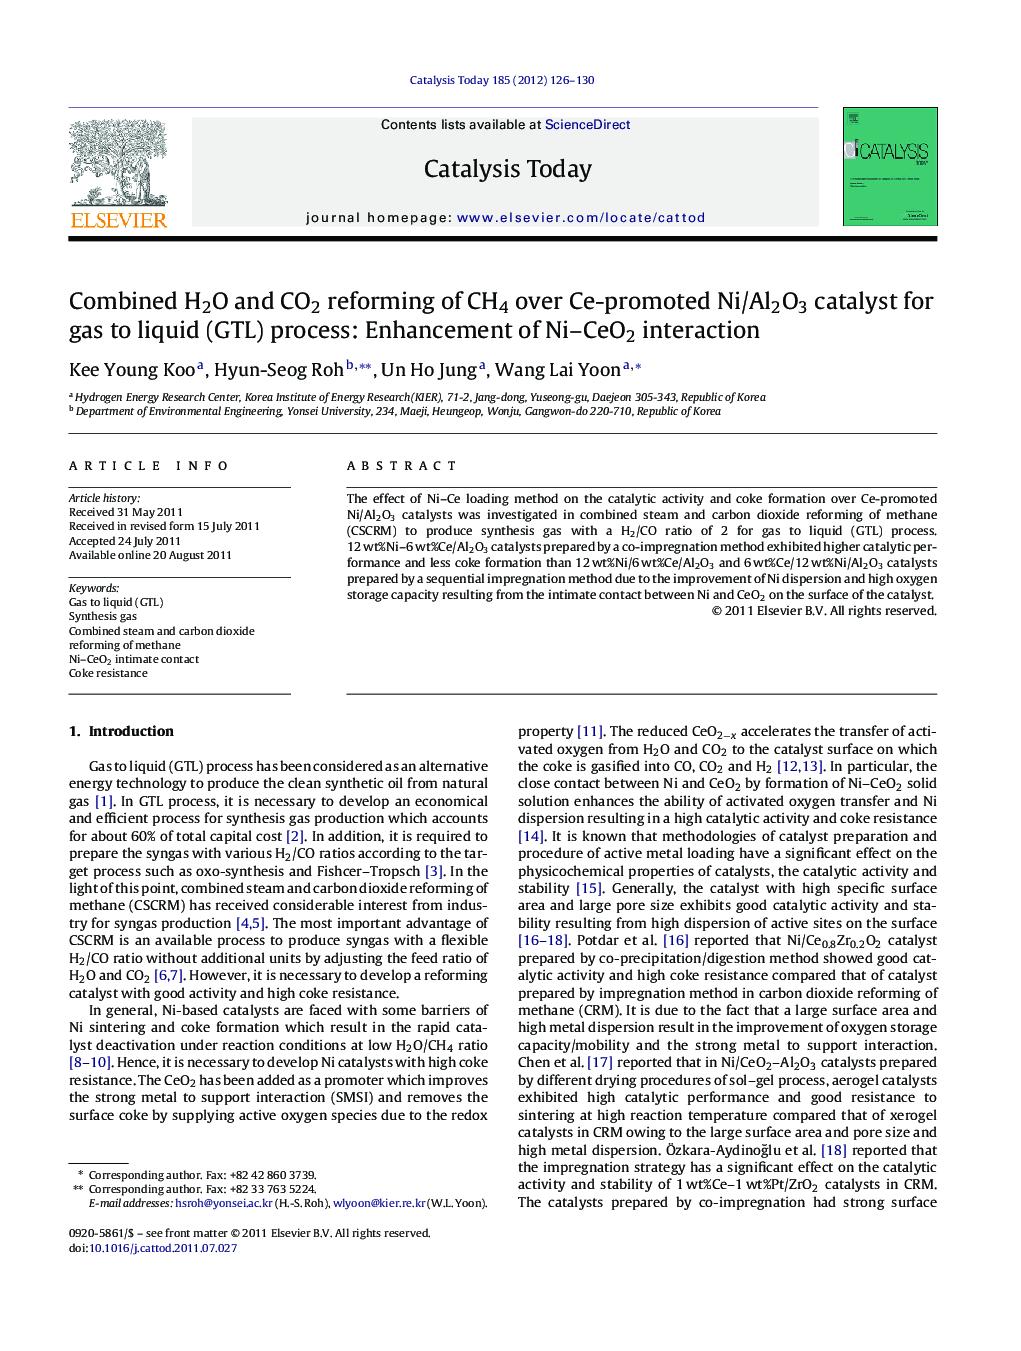 Combined H2O and CO2 reforming of CH4 over Ce-promoted Ni/Al2O3 catalyst for gas to liquid (GTL) process: Enhancement of Ni–CeO2 interaction